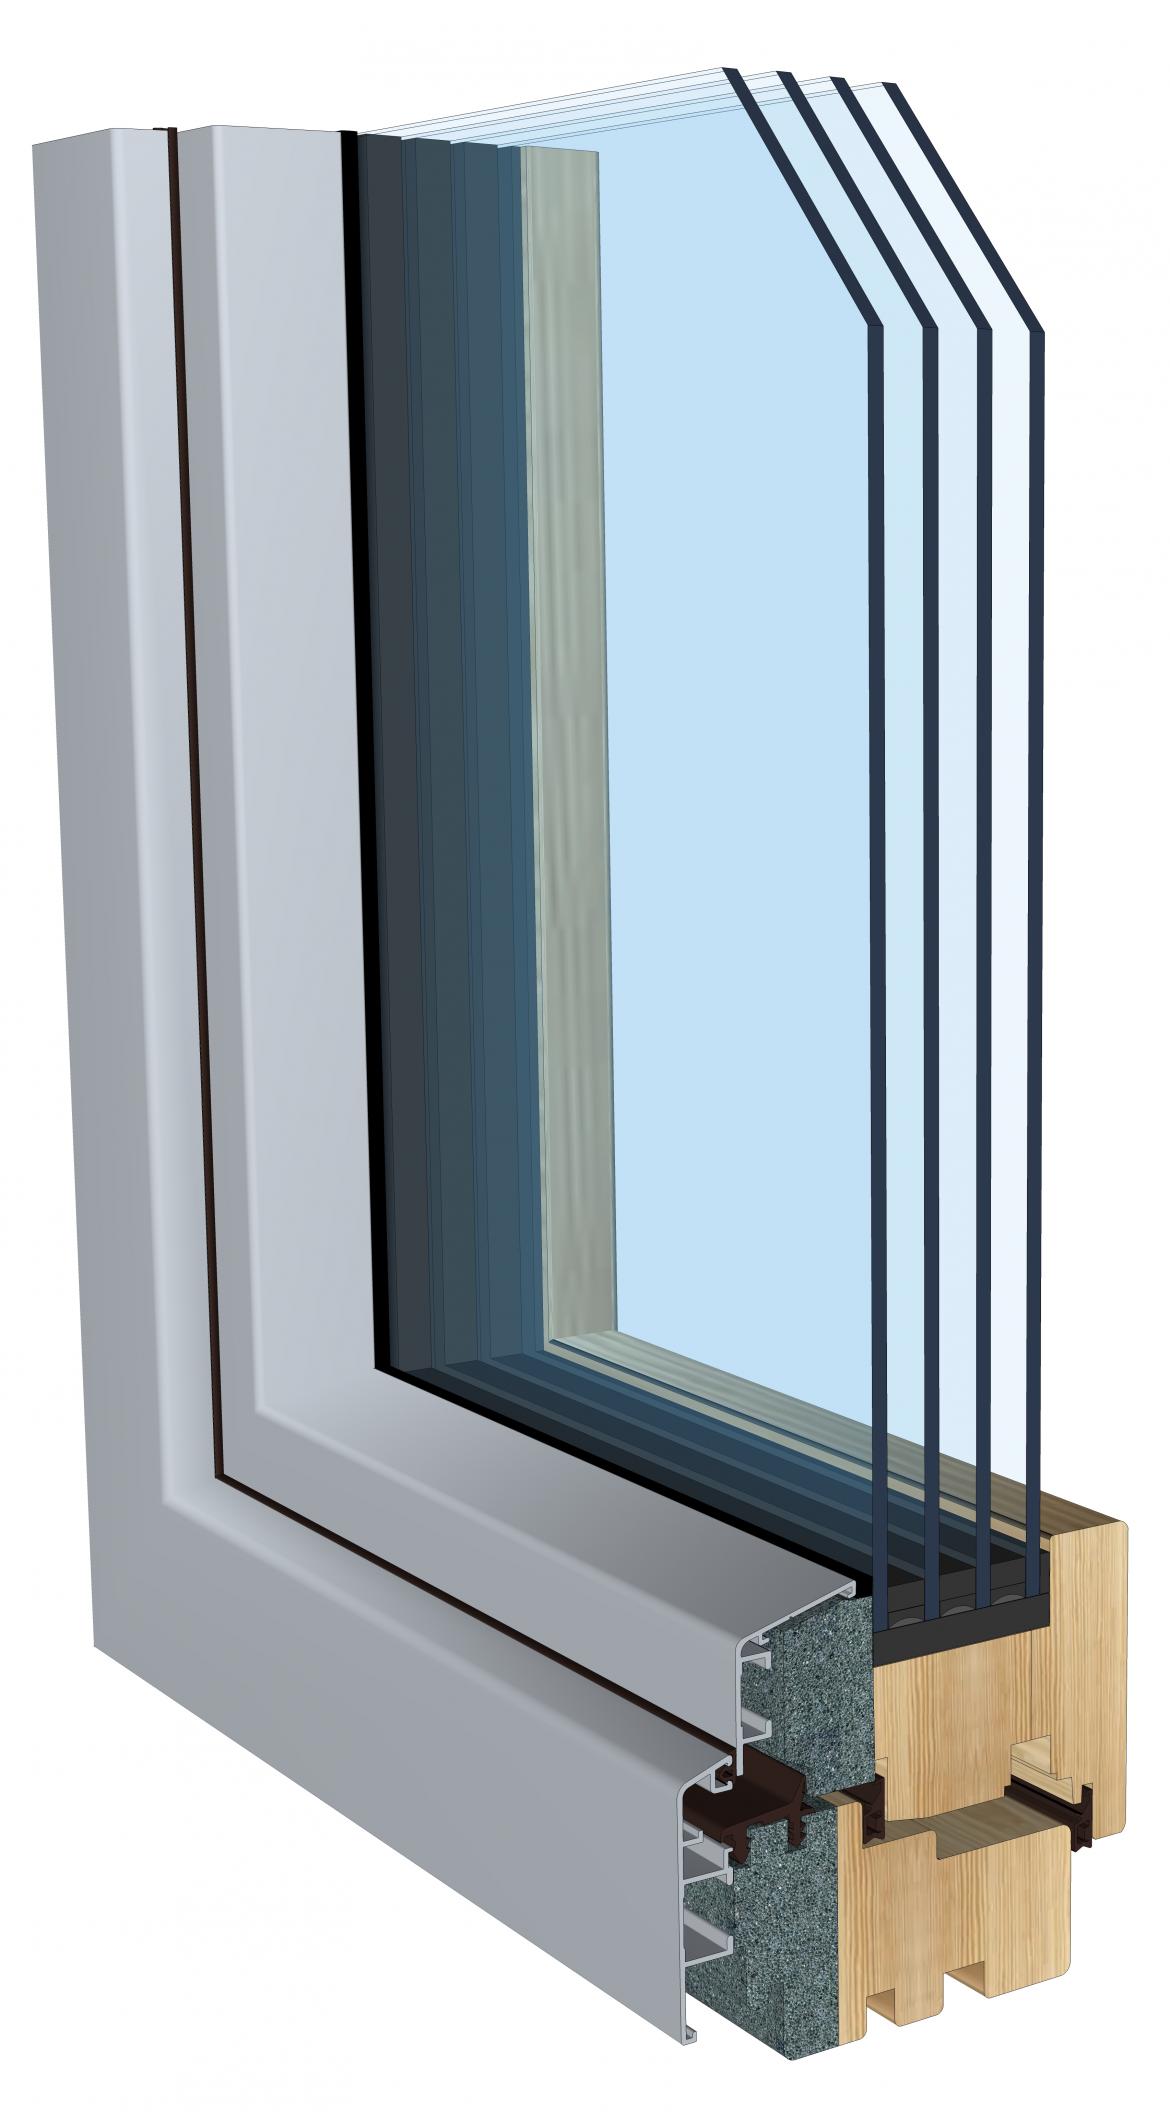 Arctic is a new premium performance window that can be used across a broad range of temperatures, including extremely cold climates. The Passive House Institute-certified window features a wood/aluminum frame, polyurethane-foam insulation, thermal glazing, and a superspace triple seal with butyl as a secondary seal. It offers thick insulation, boasting an R-value of 15 and quadruple glazing.